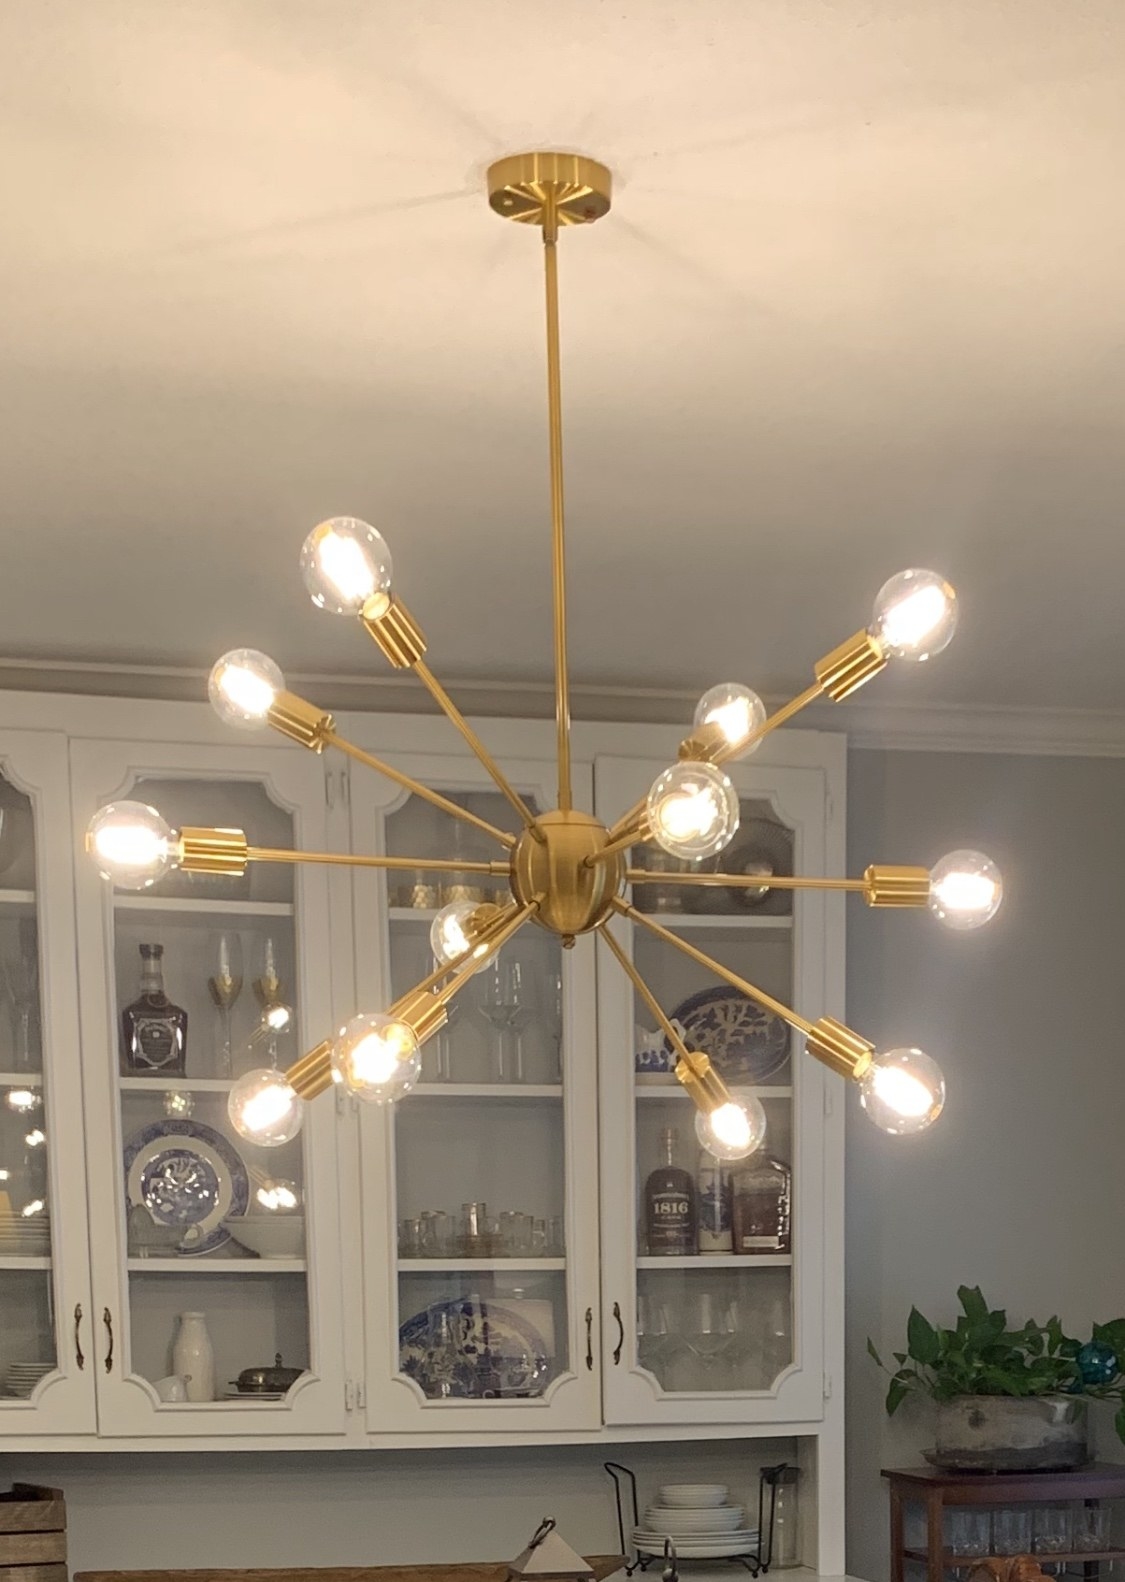 close up reviewer image of the brass 12 light sputnik chandelier hanging in a kitchen